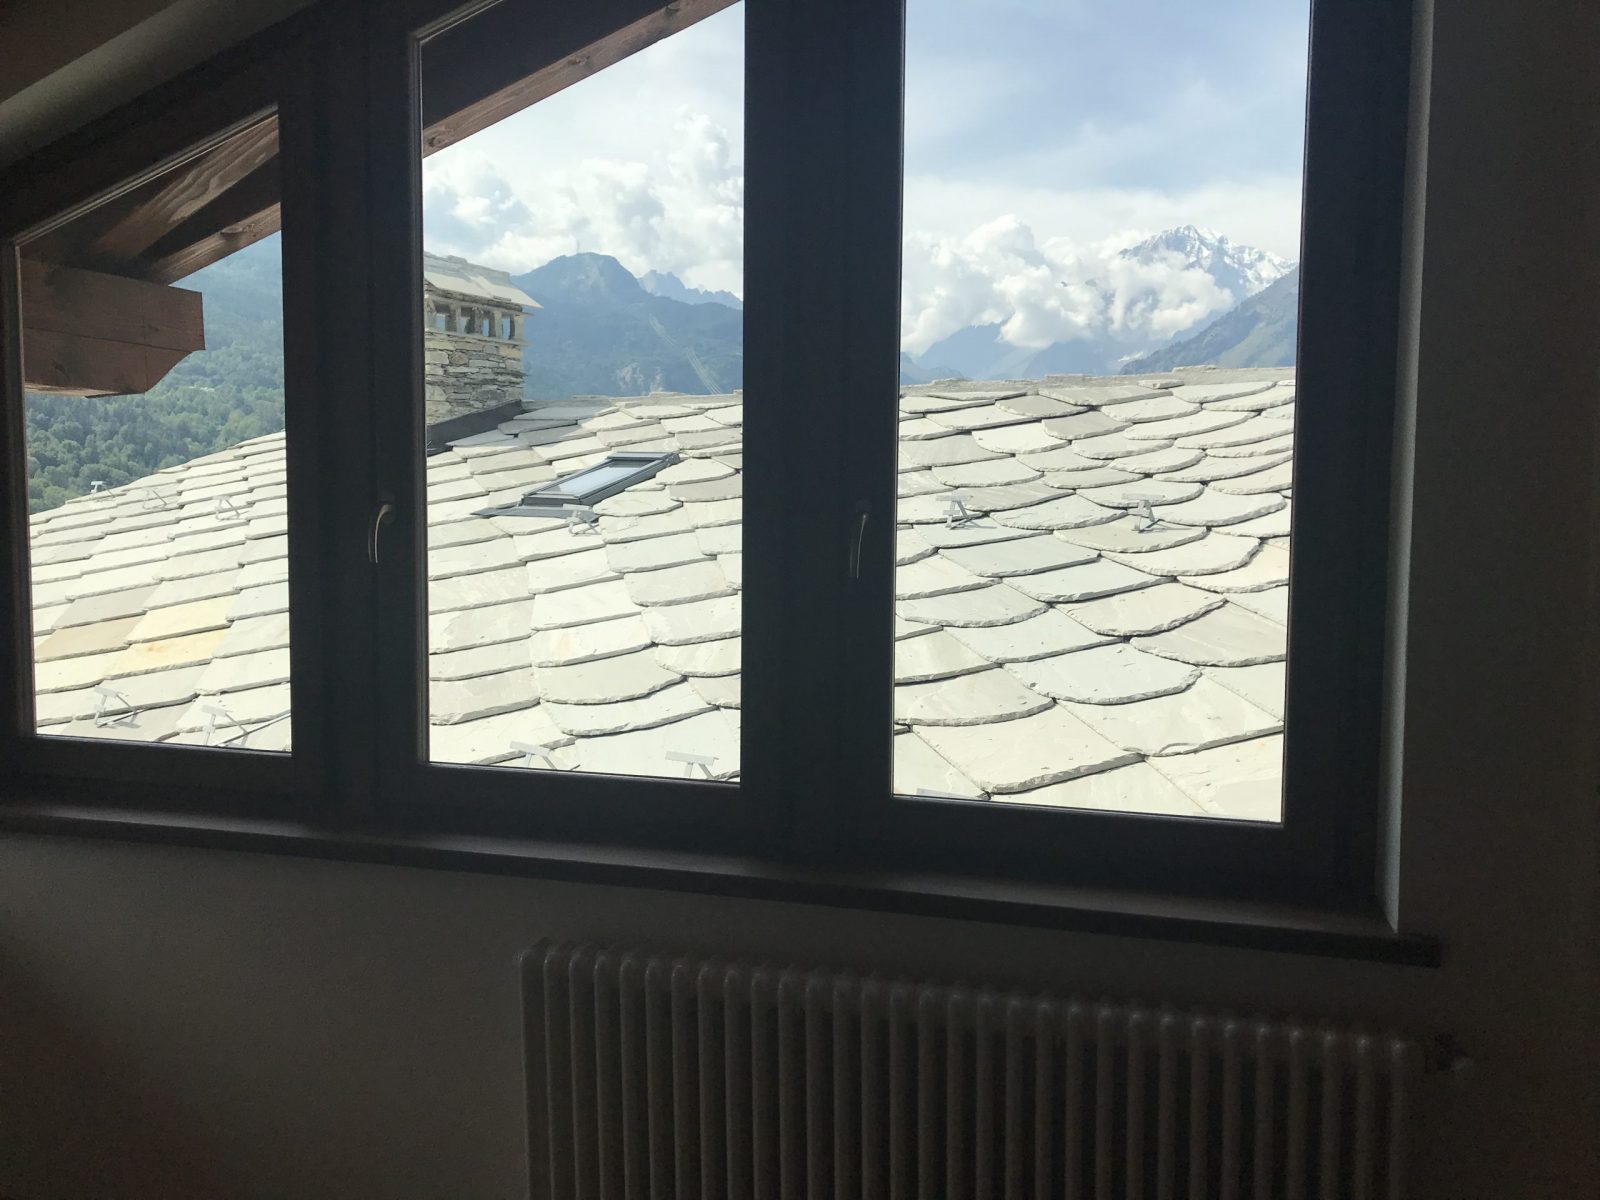 The mountain you see from the window is the Monte Bianco. The apartment in La Salle. My experience of buying a home in the Italian Alps.